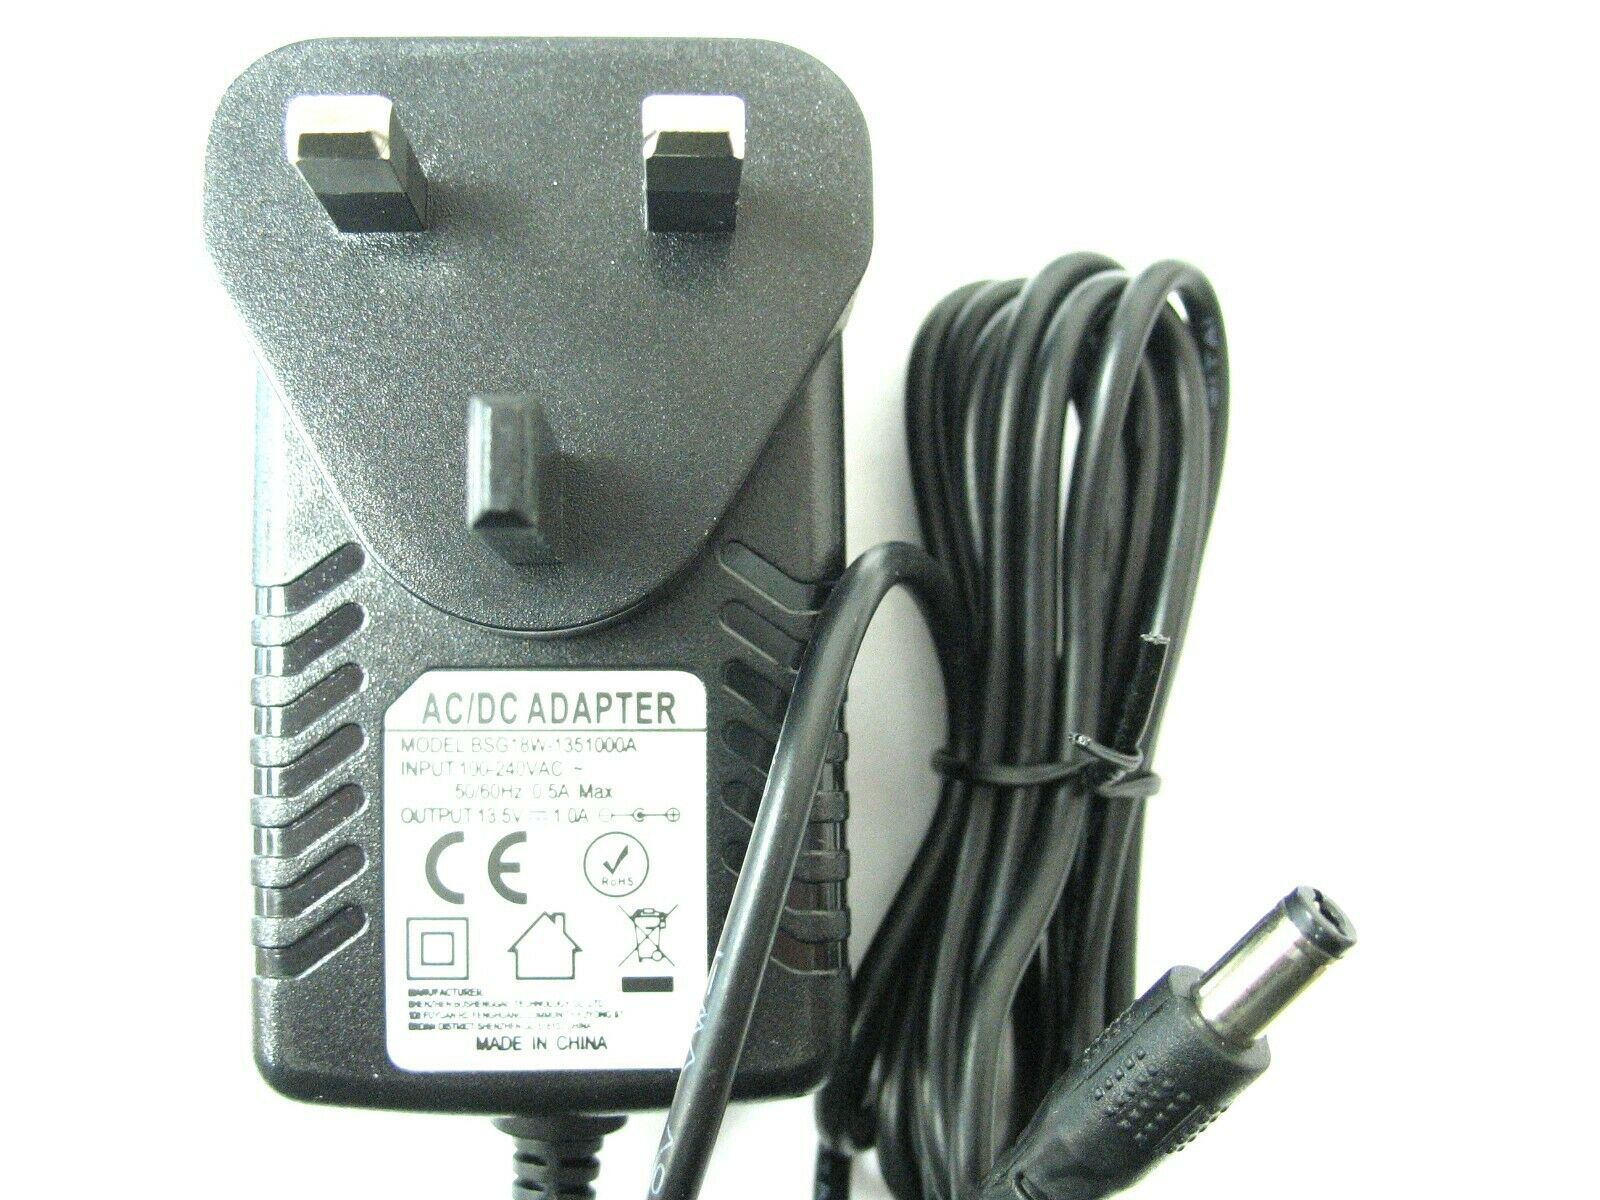 13.5V AC/DC HALFORDS POWERPACK 100/200 POWER ADAPTOR/SUPPLY/CHARGER L4D 1350 50R Type: Power Adaptor MPN: Does Not - Click Image to Close